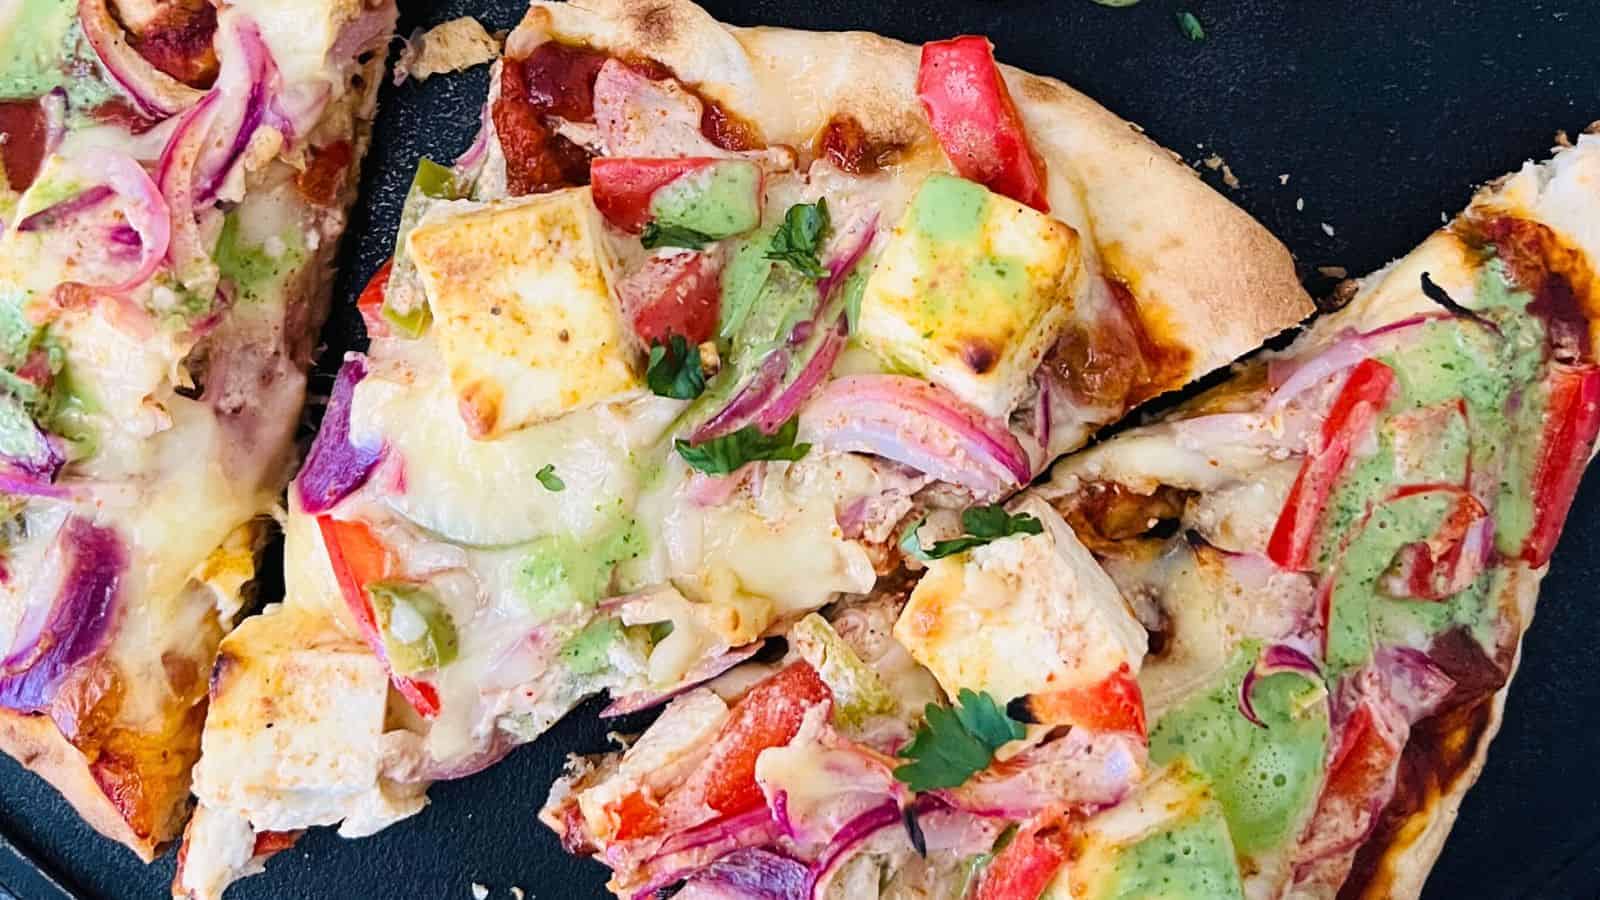 Slices of Tandori Paneer Naan Pizza with tofu, red onions, tomatoes, and drizzled with green sauce on a black surface.